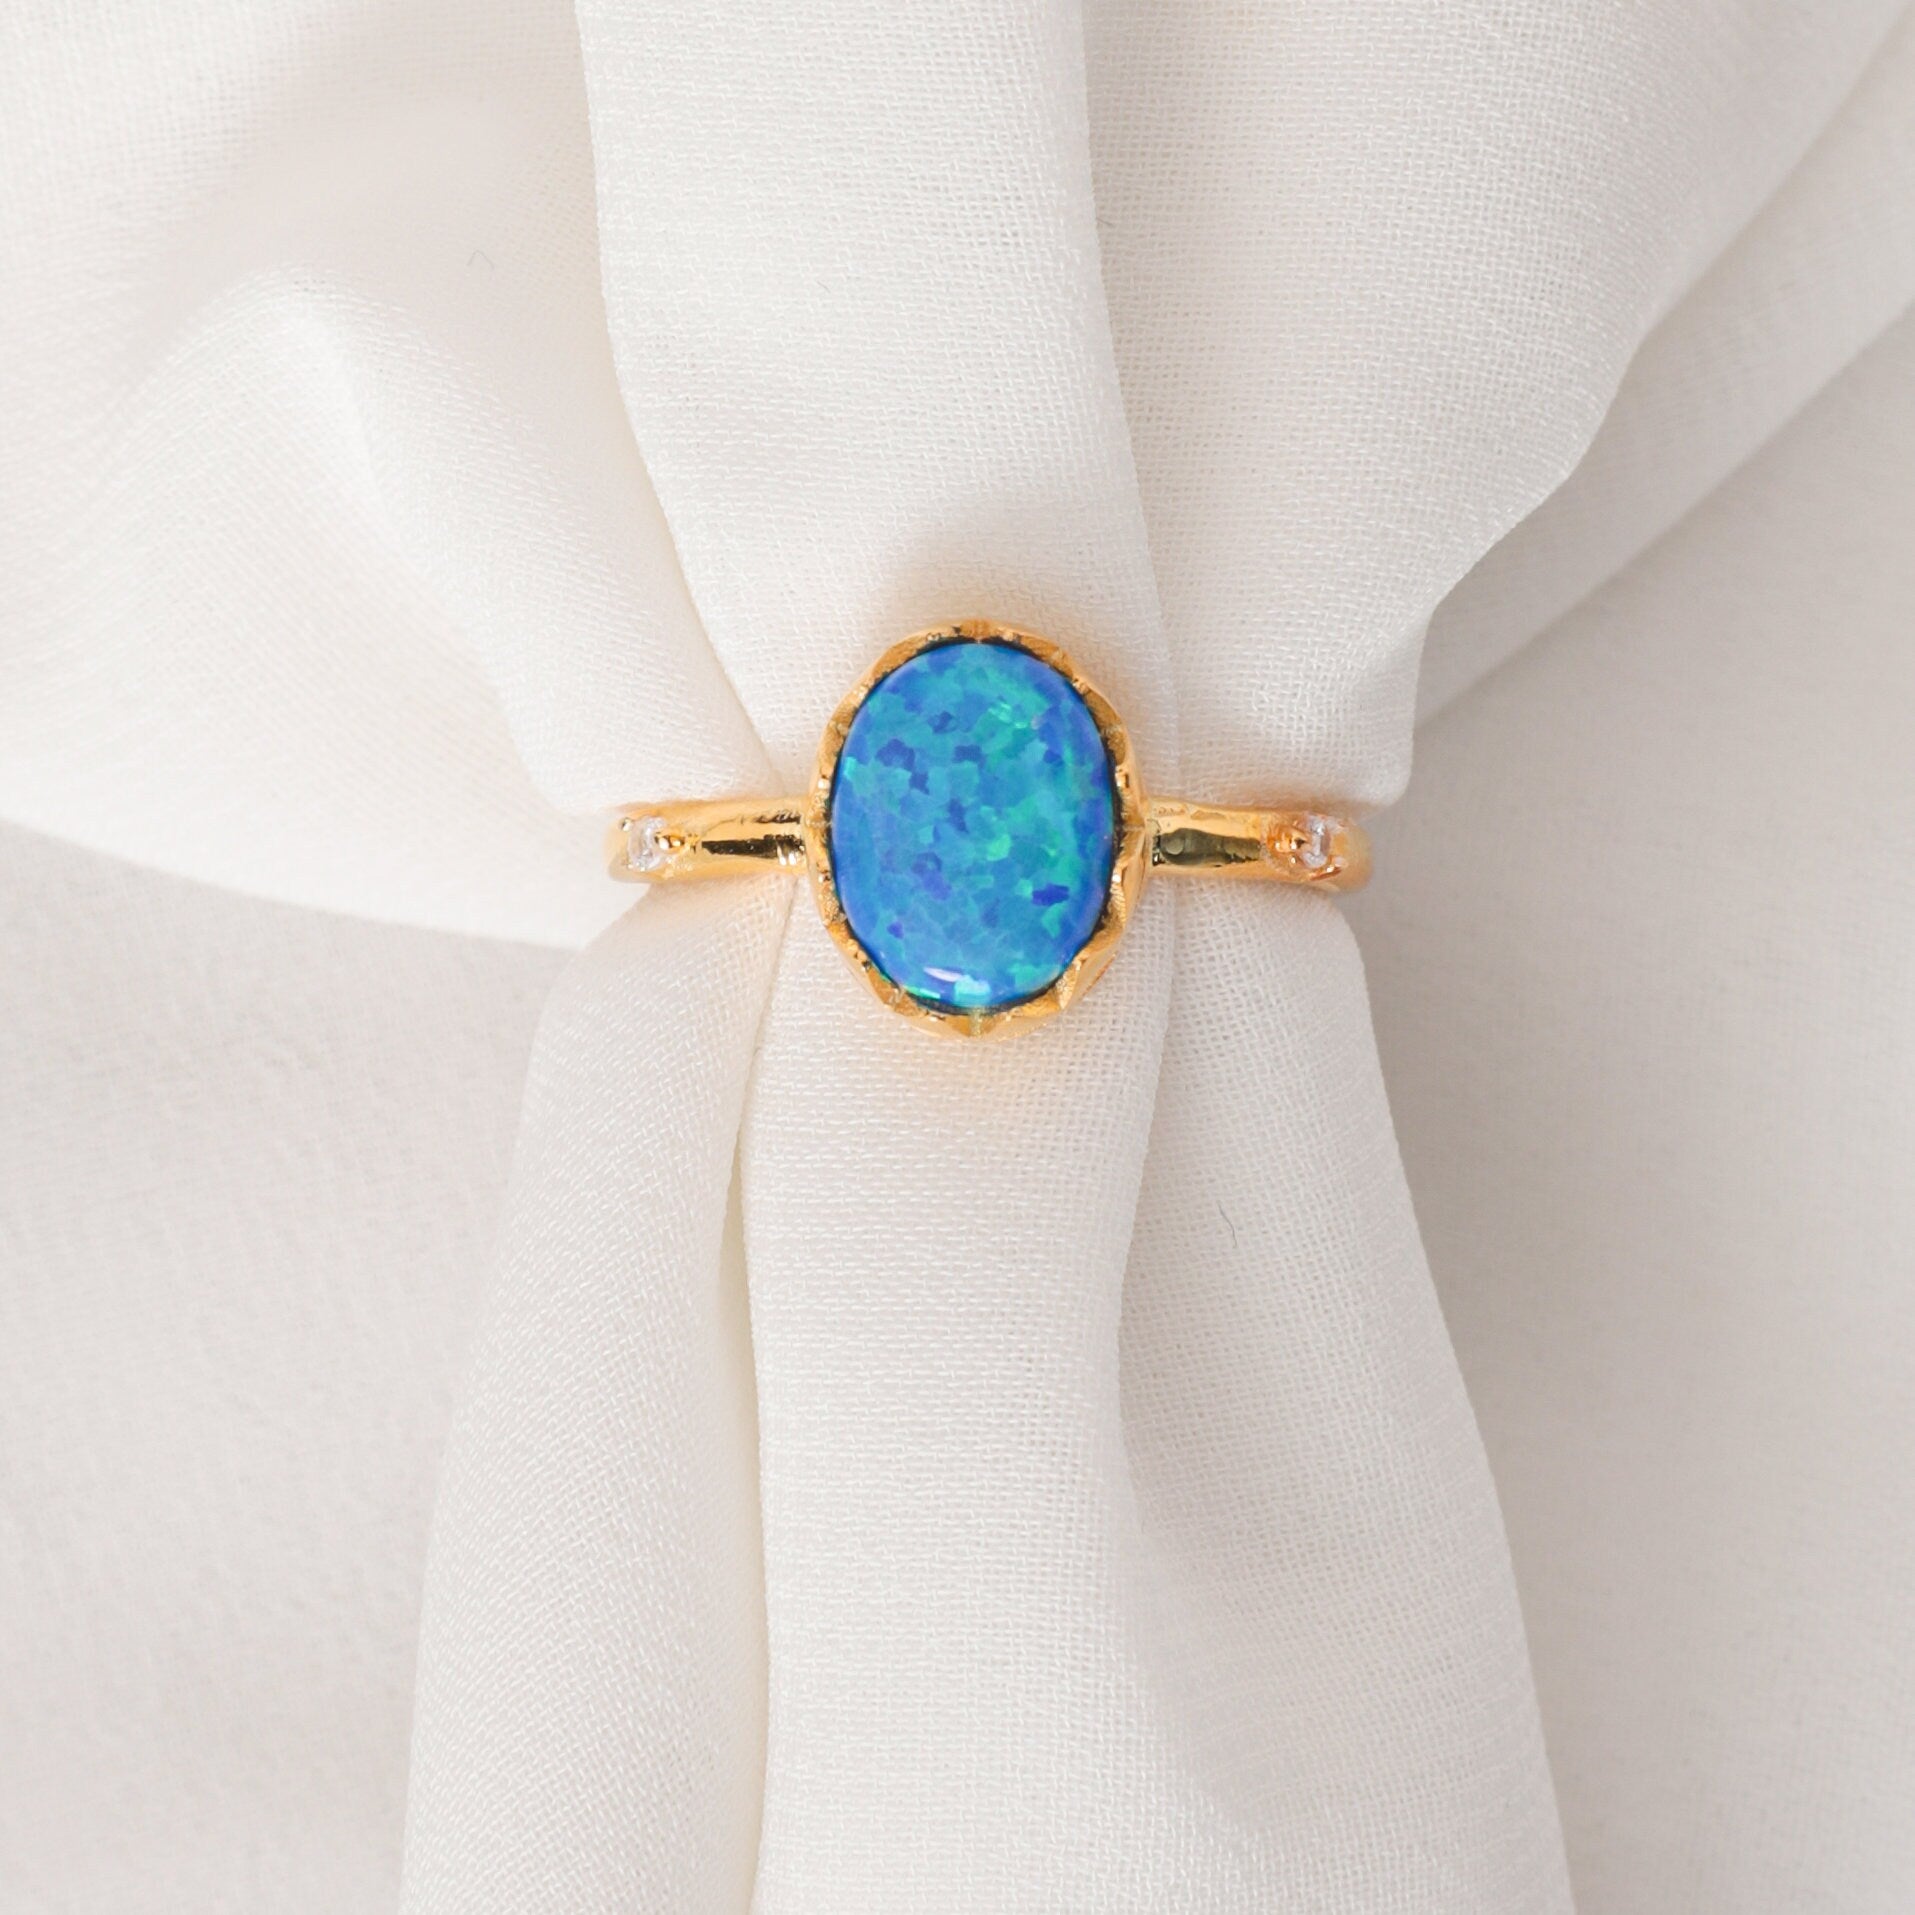 Blue Fire Opal Ring, Engagement Ring, Blue Opal Promise Rings, Sterling Silver Adjustable Blue Opal Ring, Gift For Women, Mother Day Gift